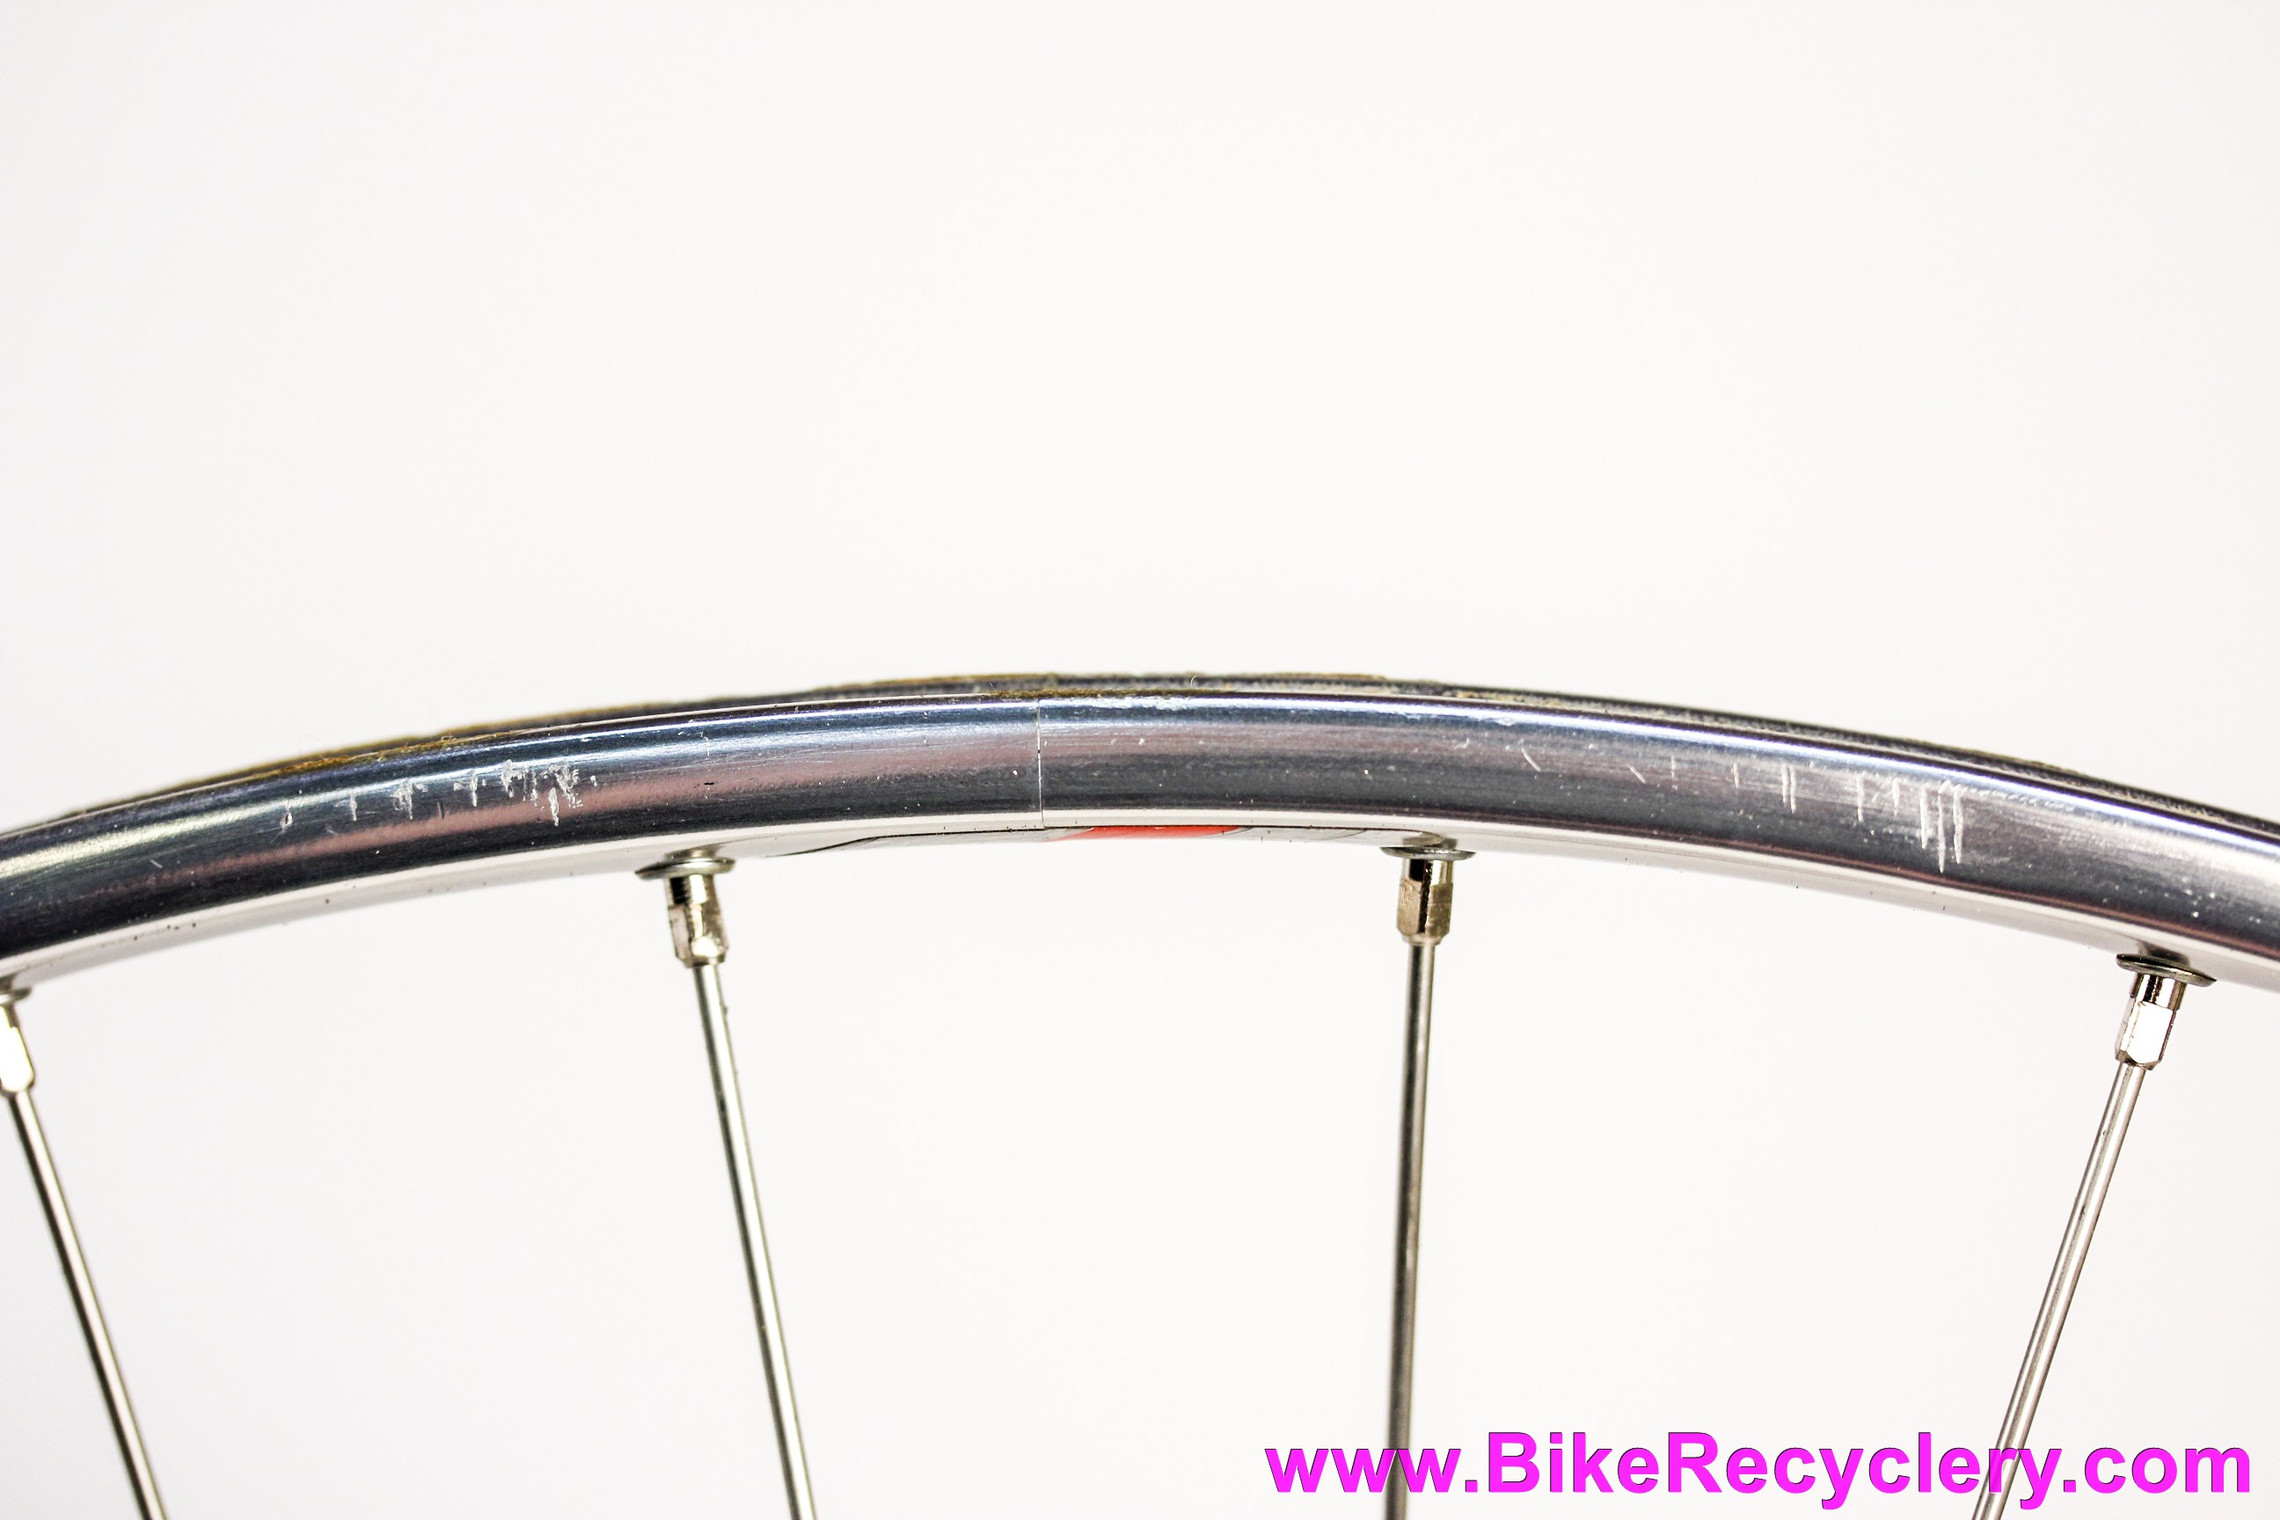 NOS Campagnolo Record Crono / C-Record Wheelset: Tubular - 36H x 126mm -  Skewers - Polished/Red - RARE (Take Off, w/ Storage Damage)